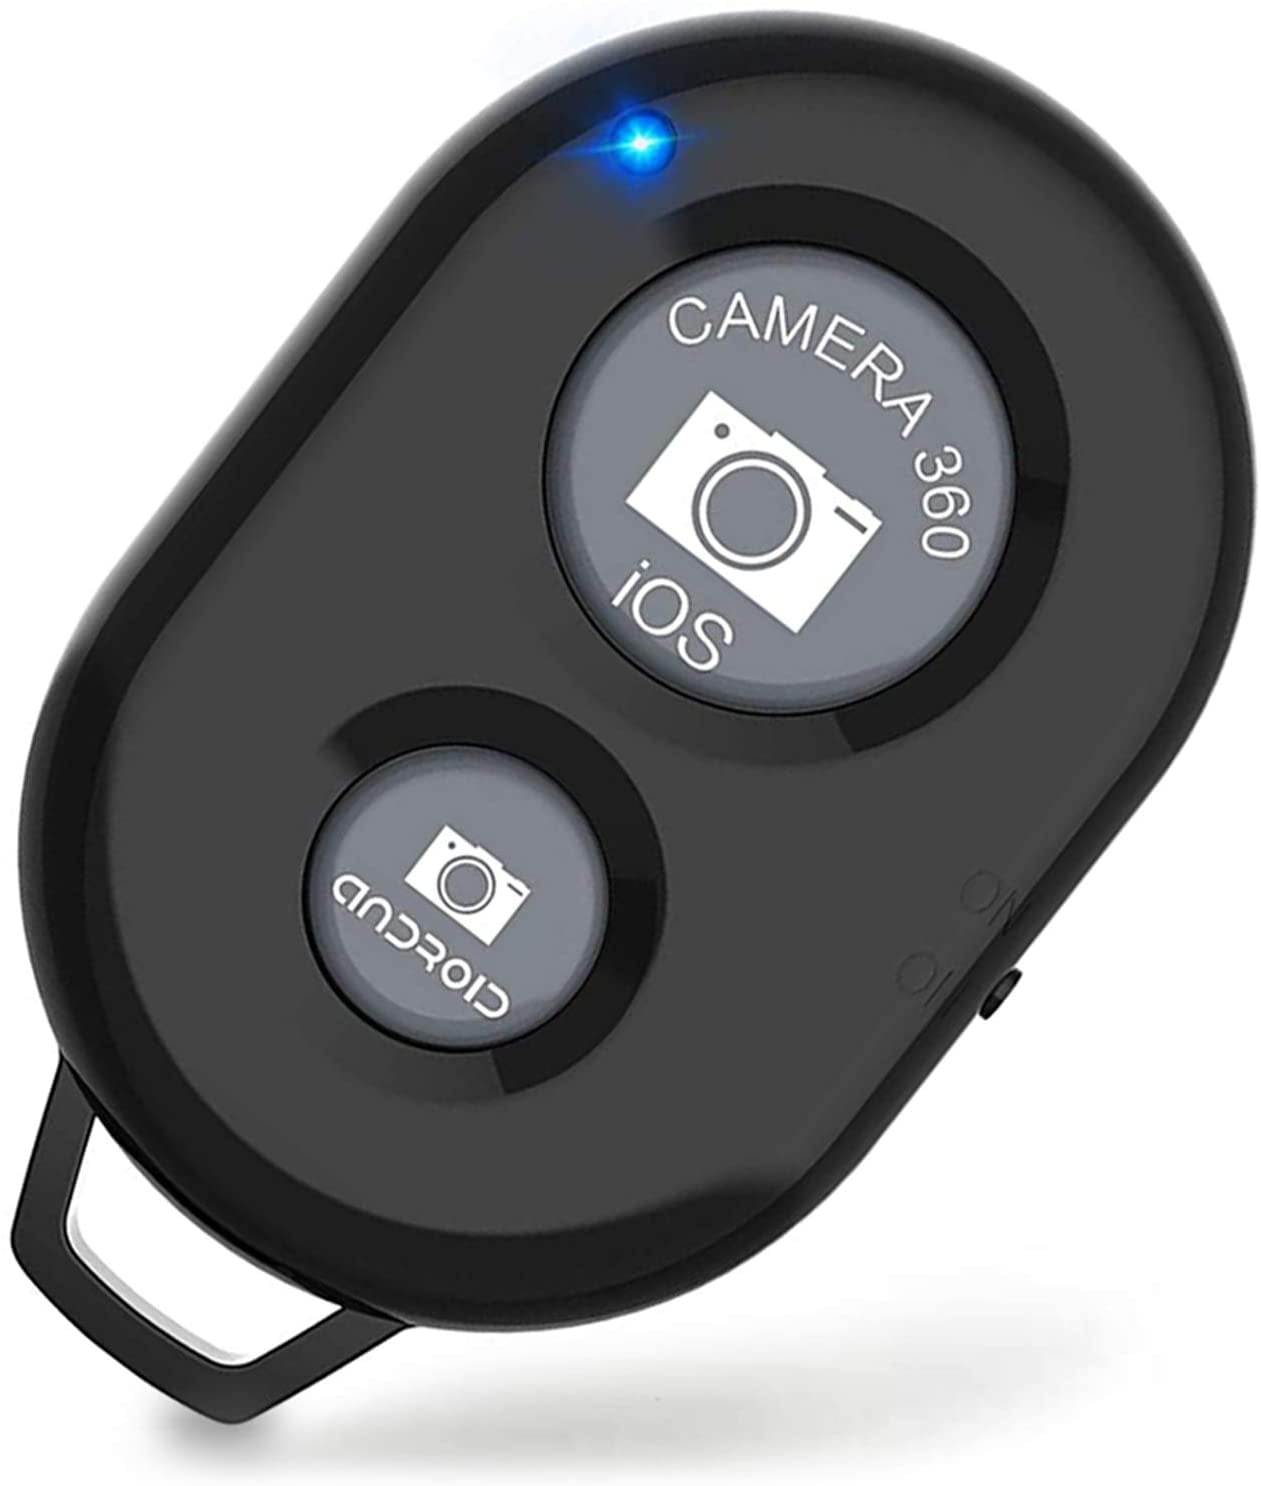 Bluetooth Self Timer Camera Shutter Remote Control with Bluetooth Wireless Technology Create Amazing Photos and Videos Hands-free Works with Most Smartphones and Tablets Black 1 Pc